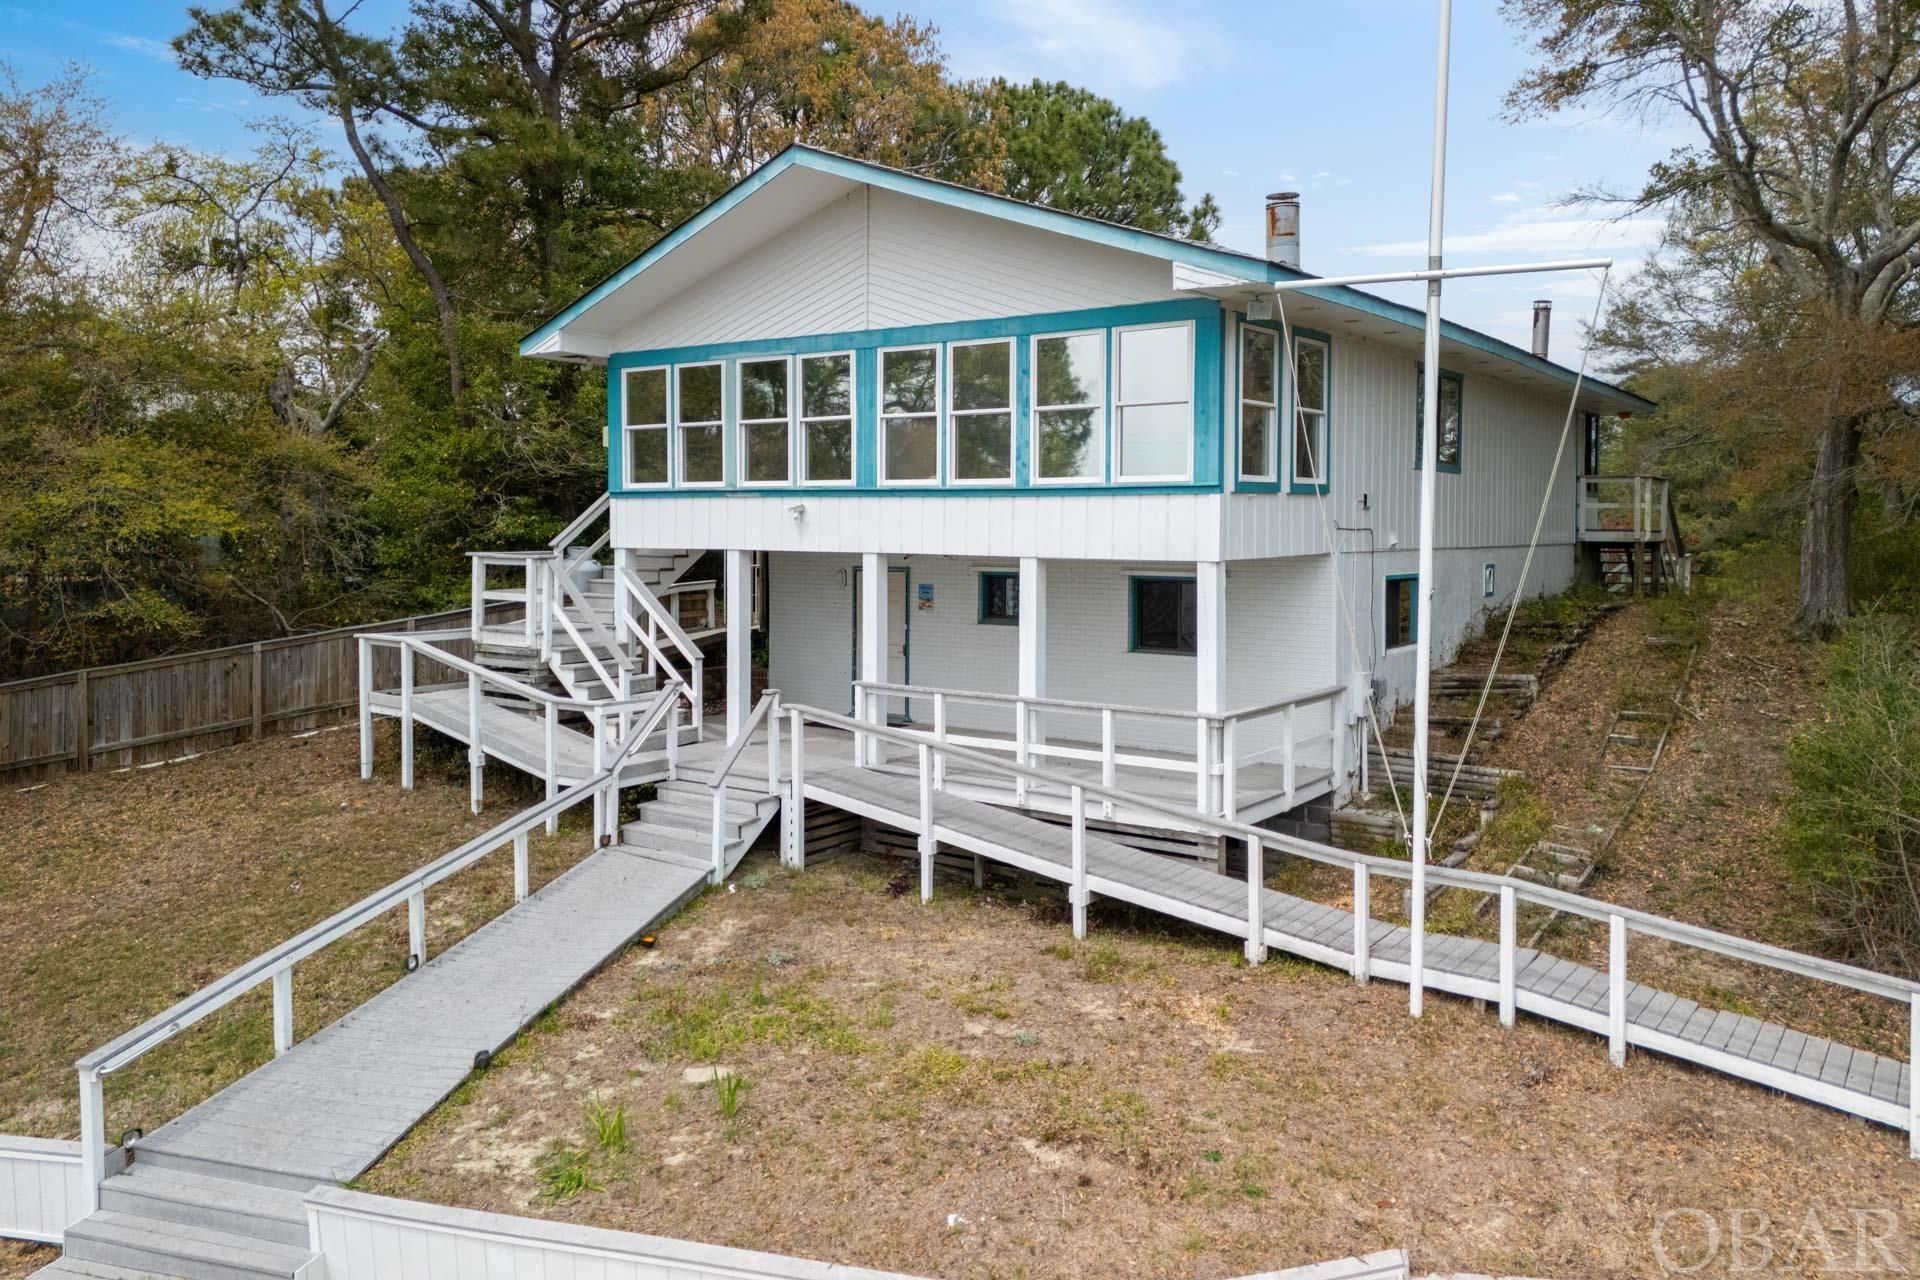 802 Harbour View Drive, Kill Devil Hills, NC 27948, 3 Bedrooms Bedrooms, ,2 BathroomsBathrooms,Residential,For sale,Harbour View Drive,125351